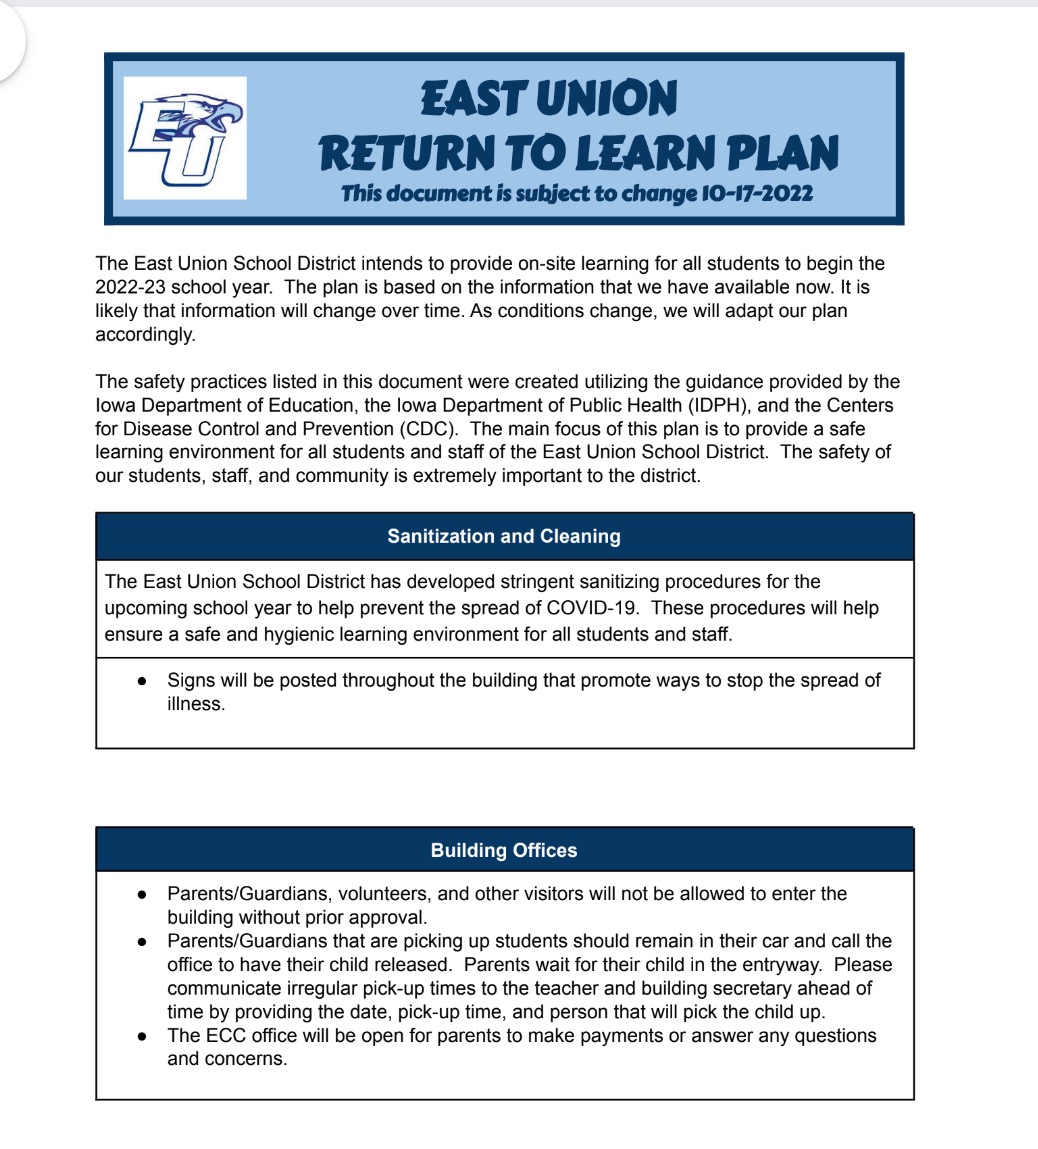 East Union Return to Learn Plan